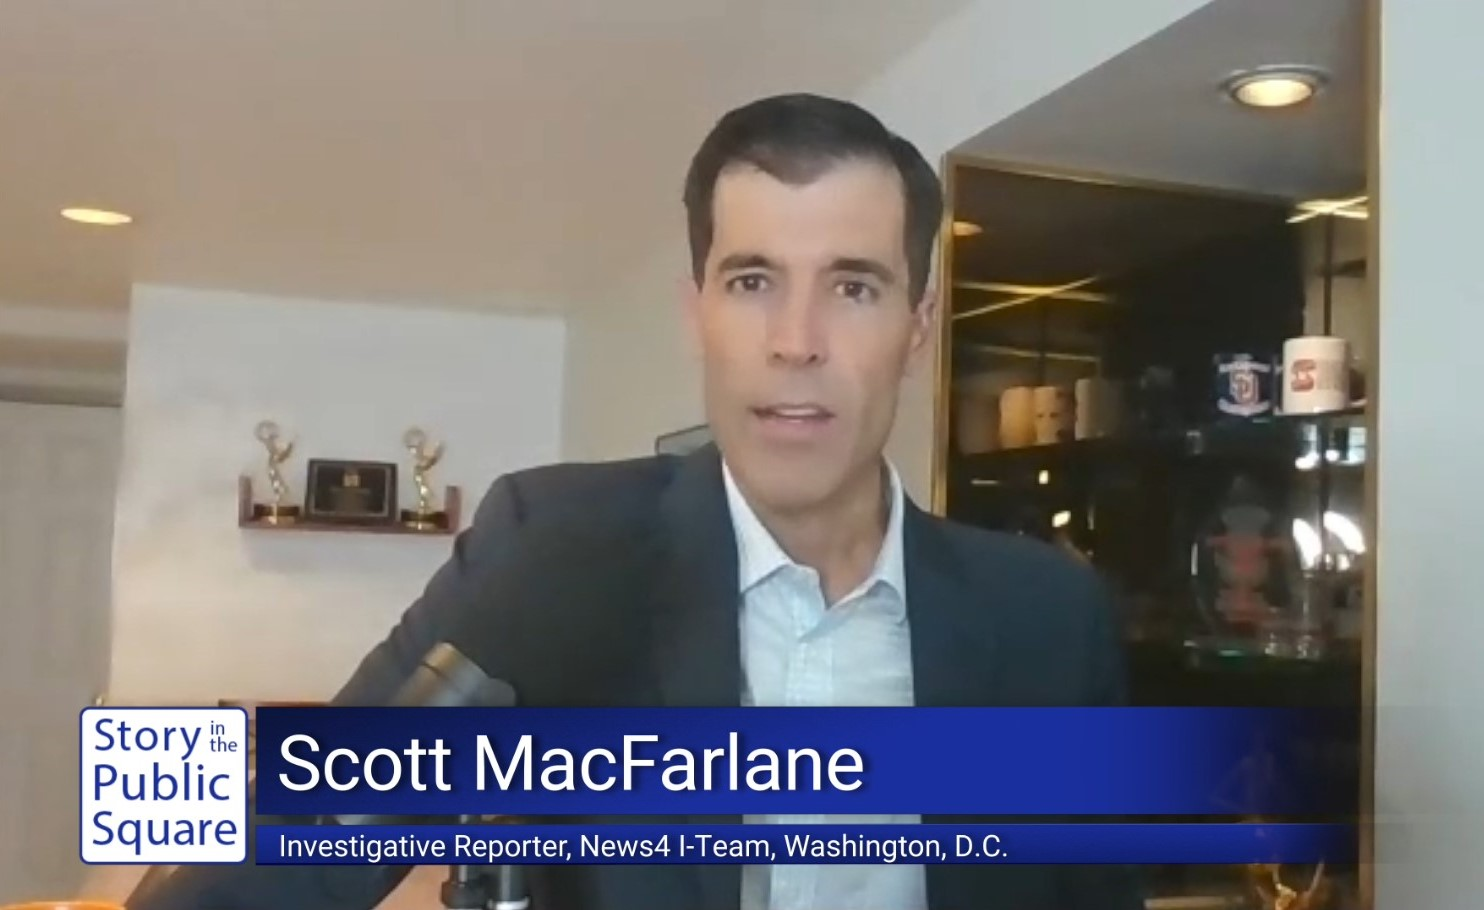 Investigating the Events of January 6, 2021 with Scott MacFarlane